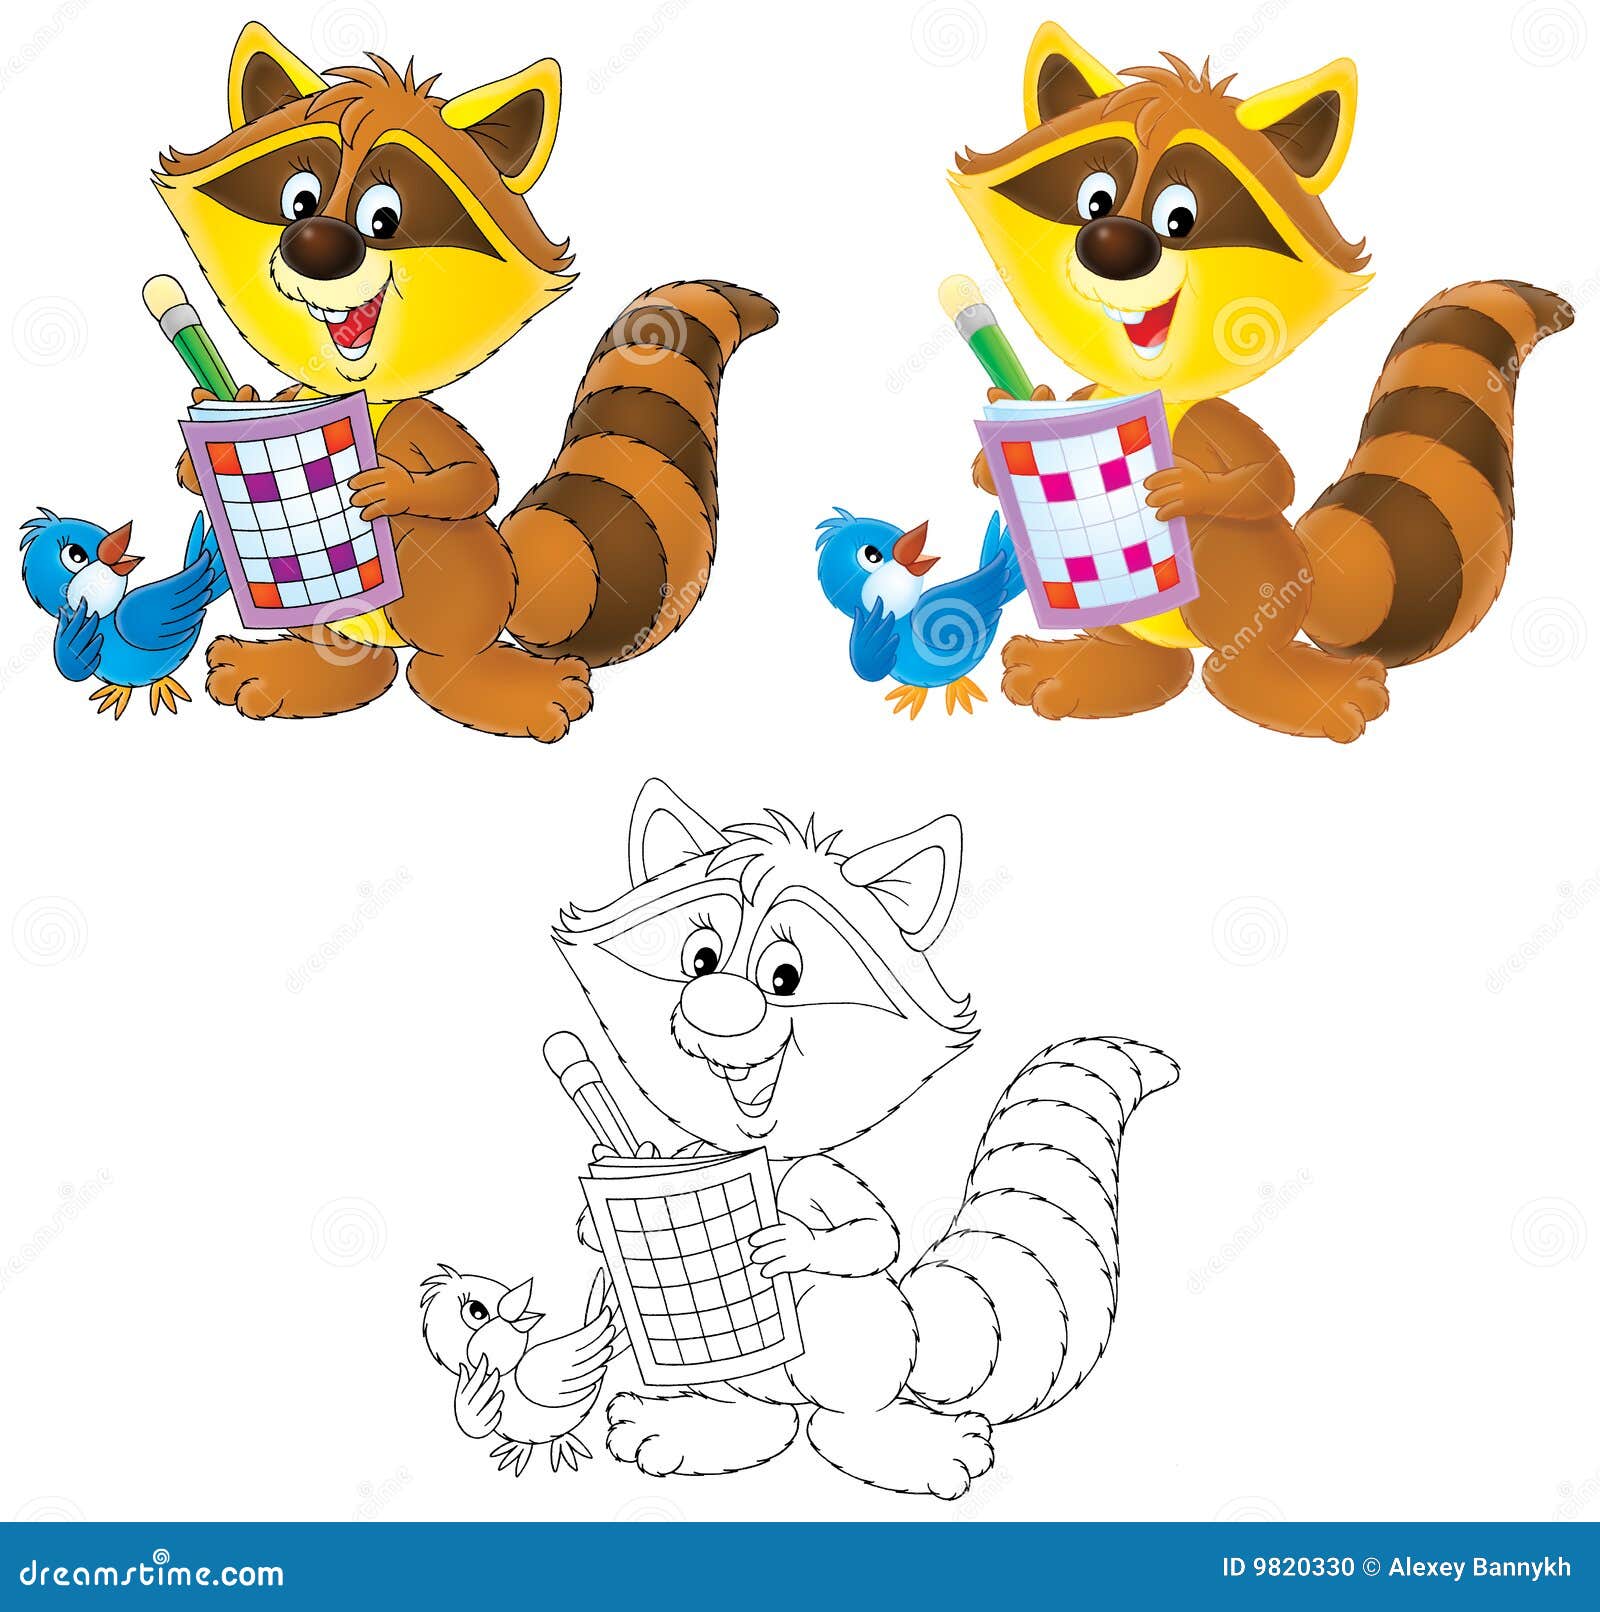 Raccoon And Bird Solve A Crossword Puzzle Stock Illustration - Illustration Of Pencil, Raccoon: 9820330